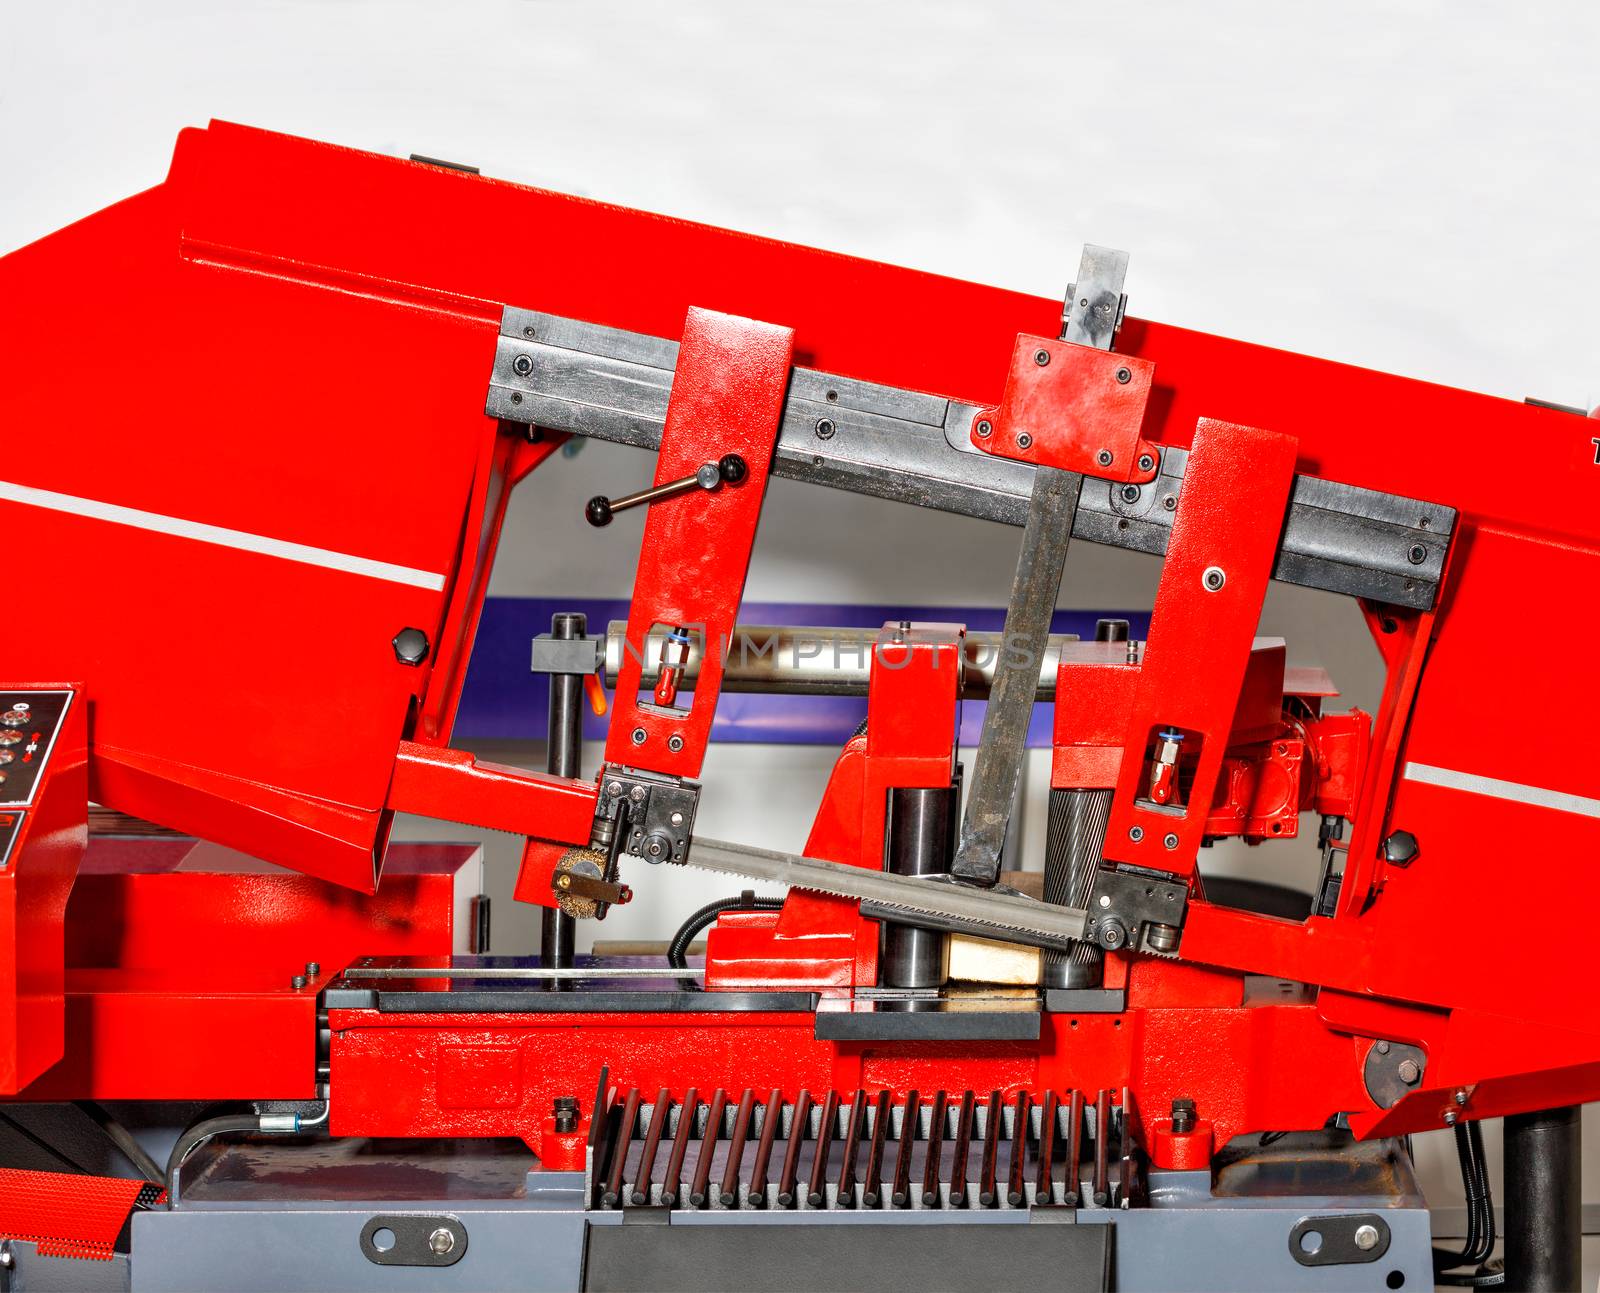 A modern metal cutting machine with bright red color with sharp teeth of the band saw provides high cutting accuracy due to the control line. Copy space.